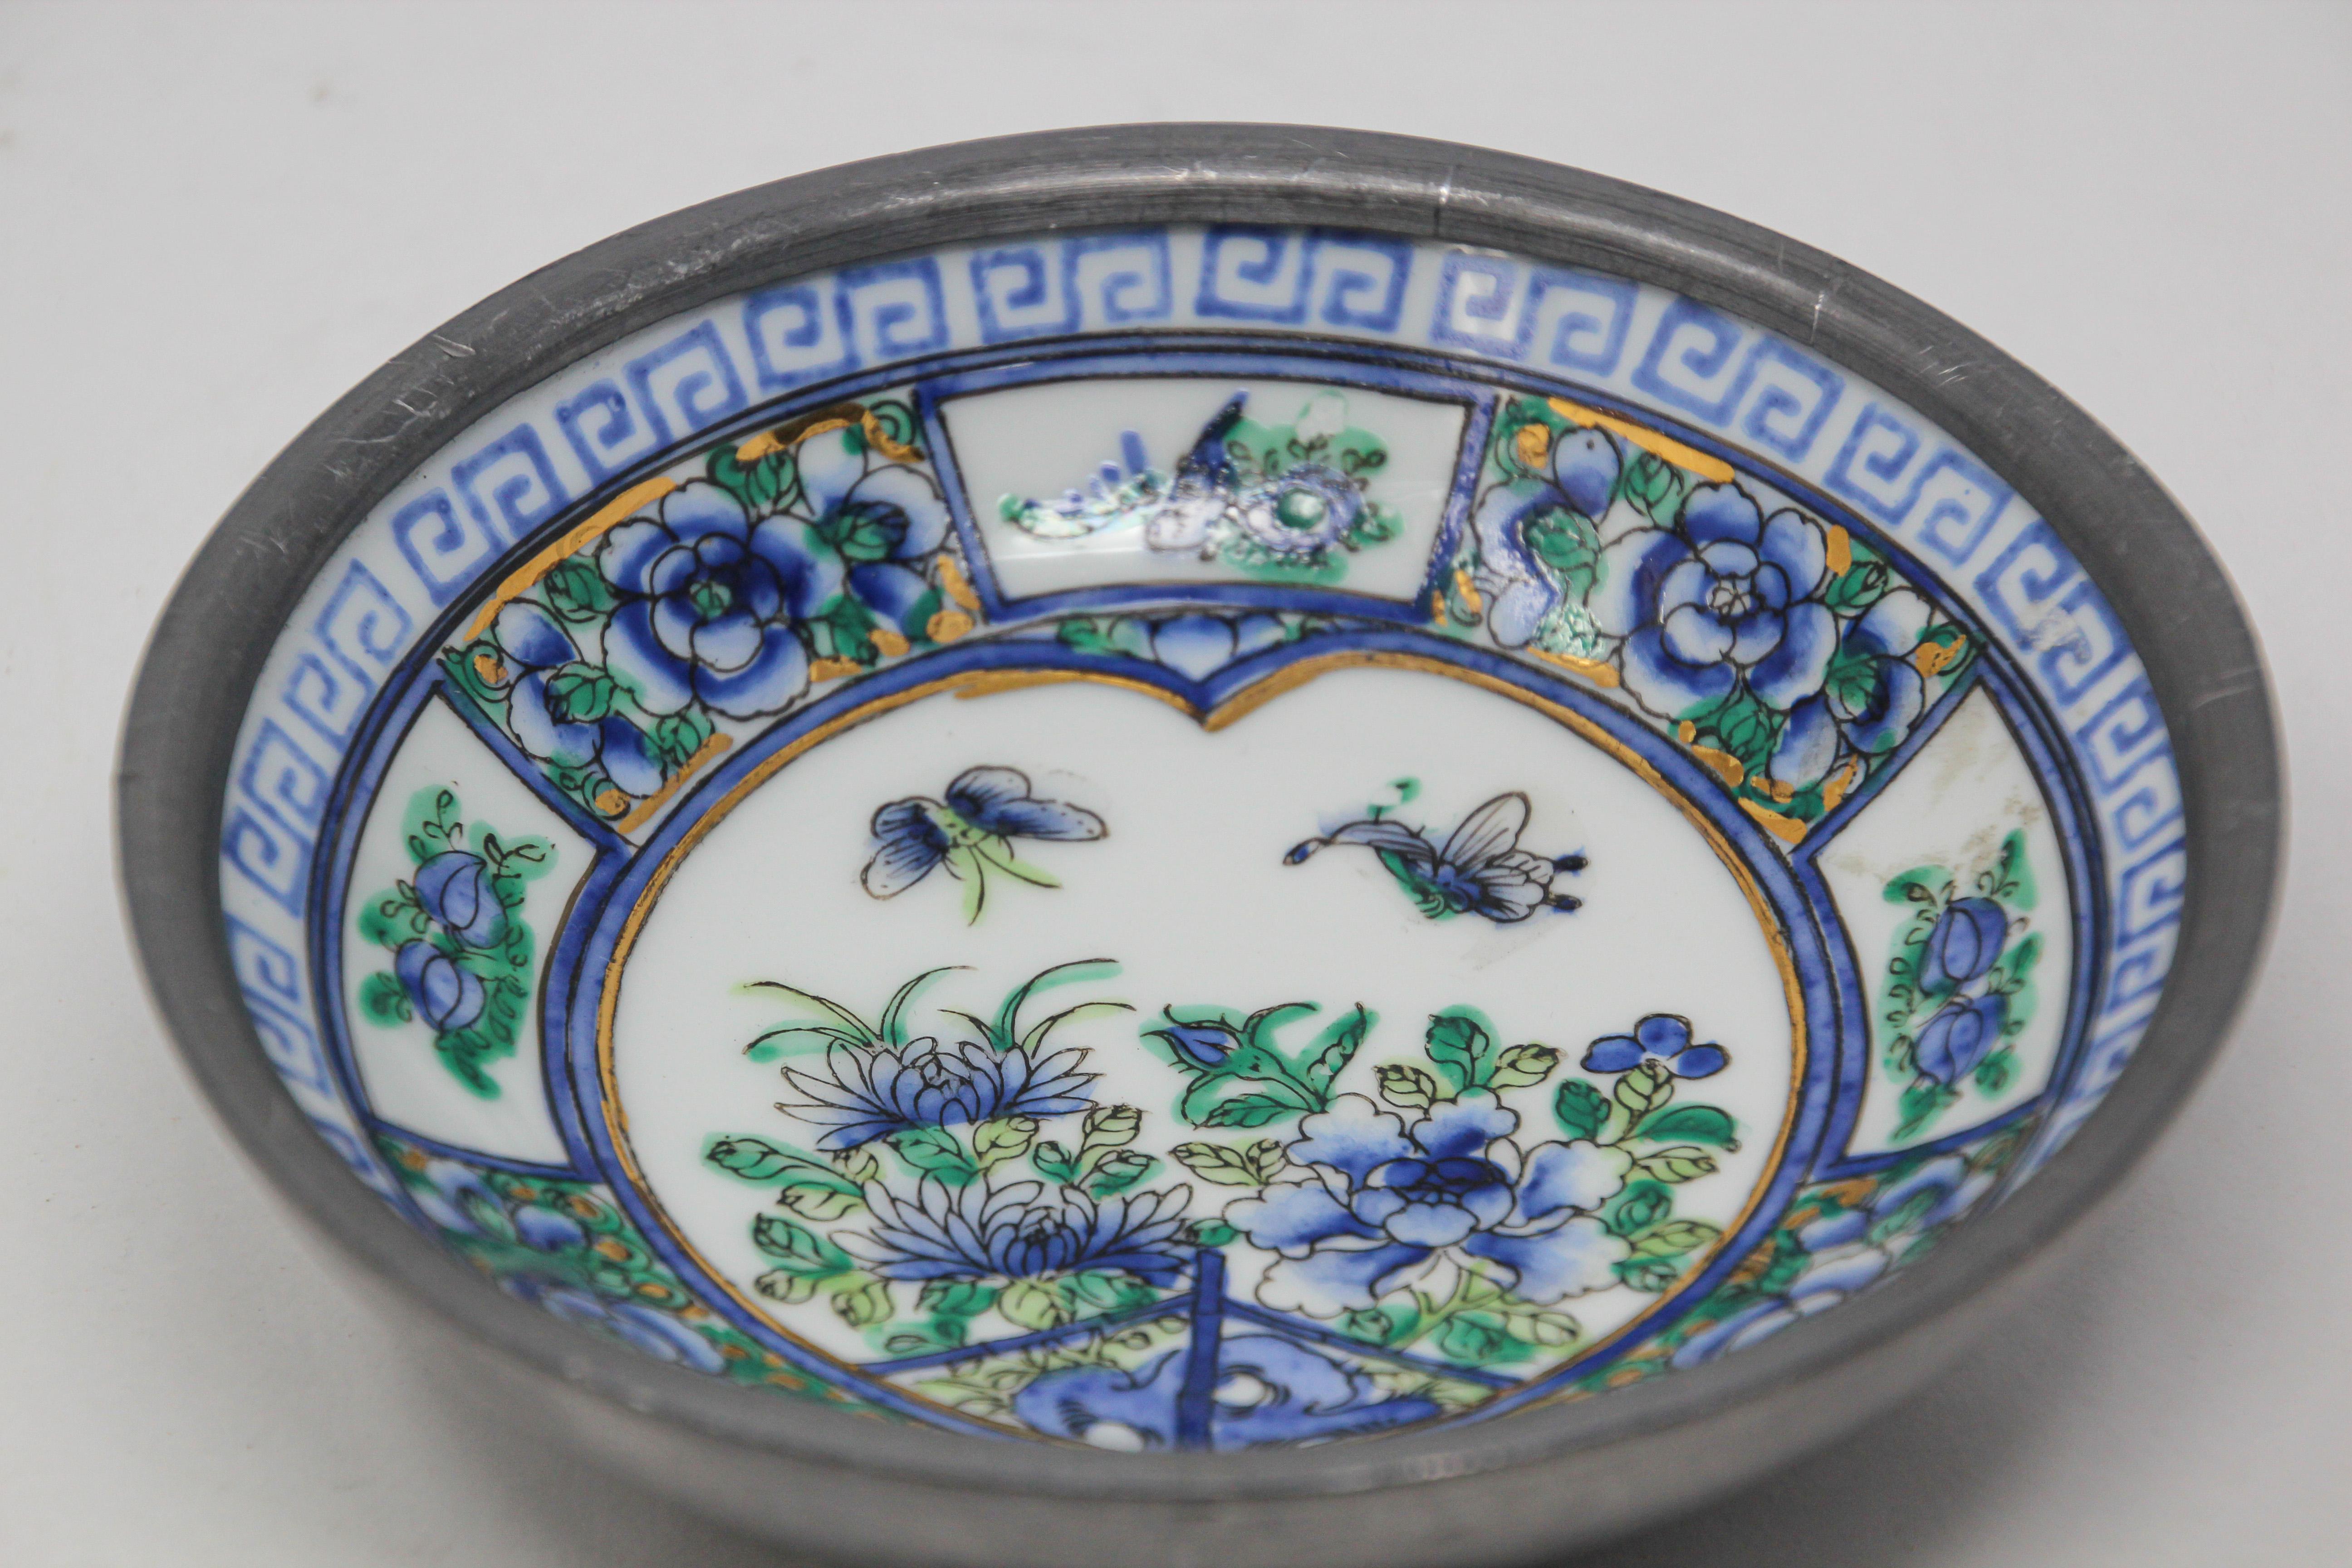 Hong Kong Vintage Blue and White Porcelain Bowl, Catchall Encased in Pewter